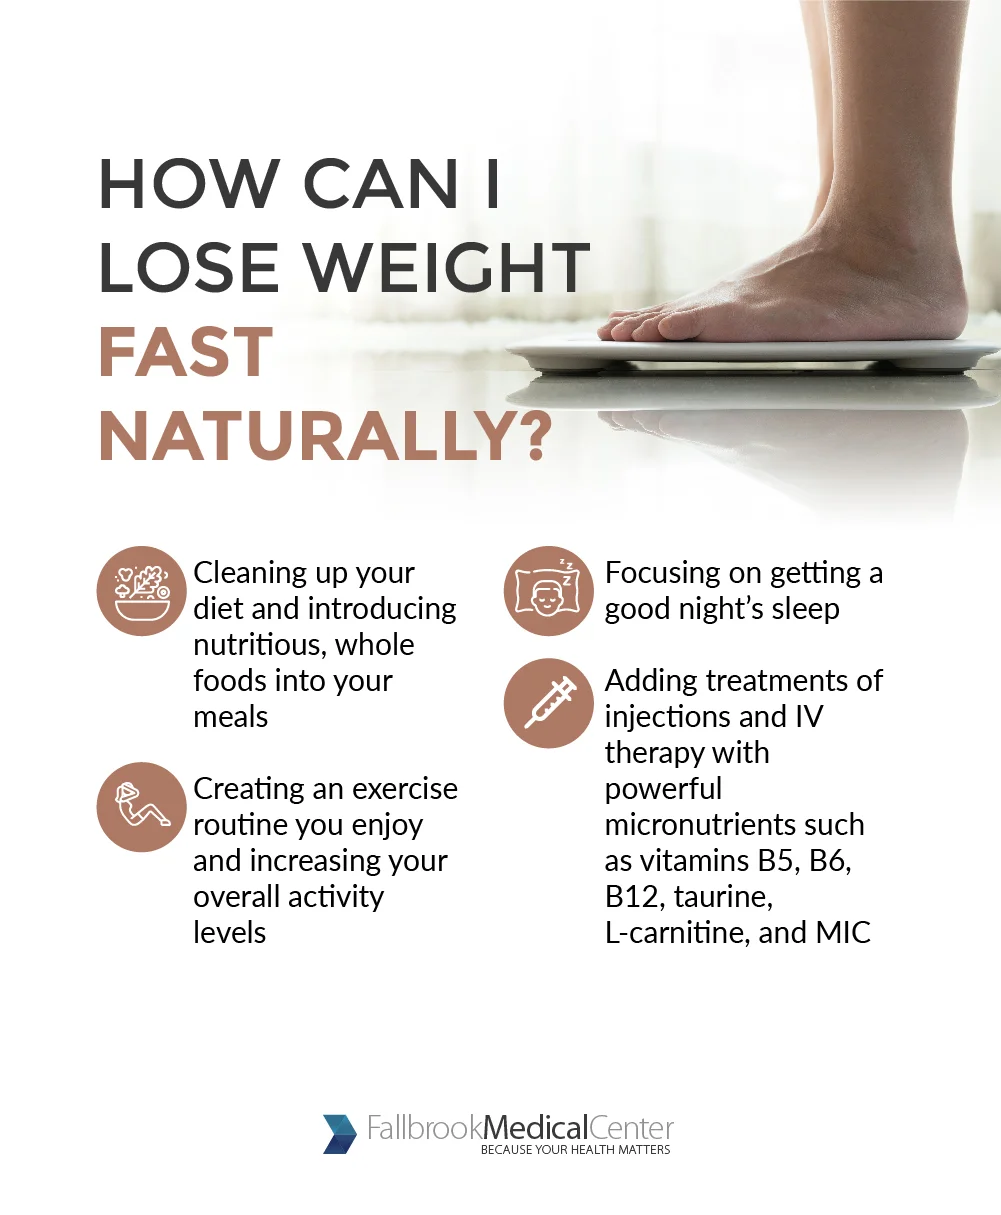 Is fast weight loss the right way to loose weight?